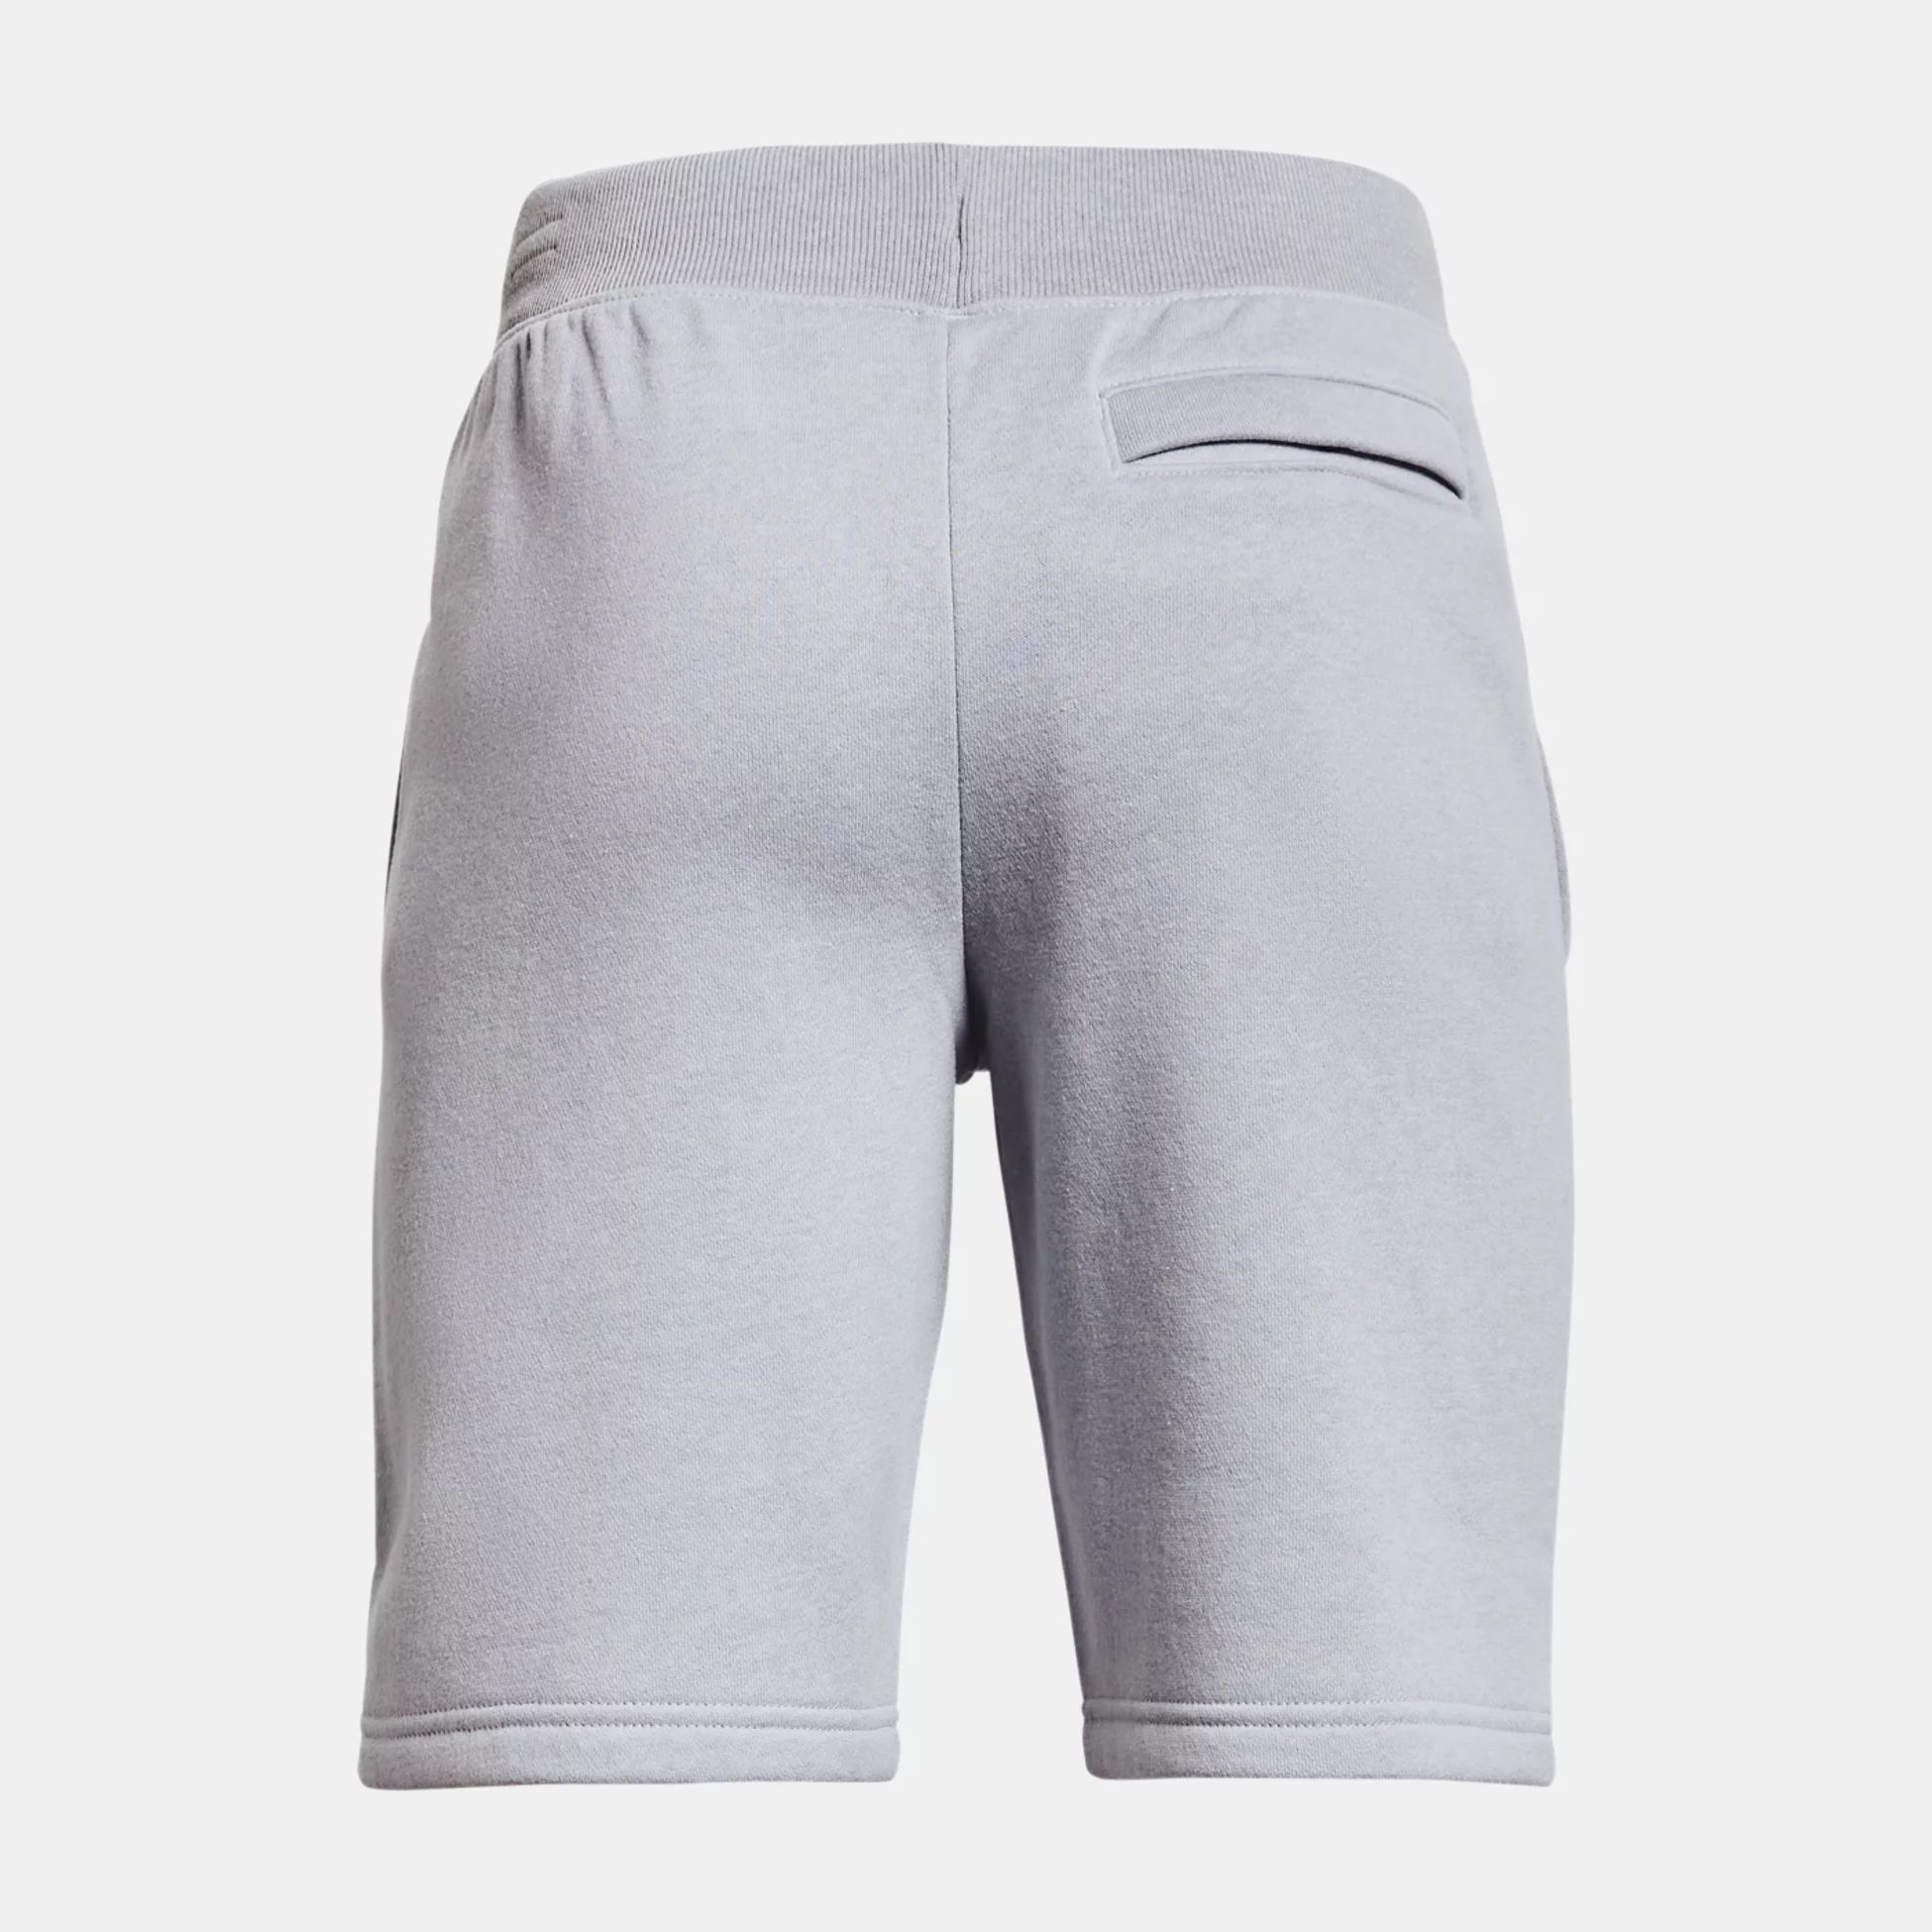 UNDER ARMOUR UA Rival Cotton Shorts - for kids